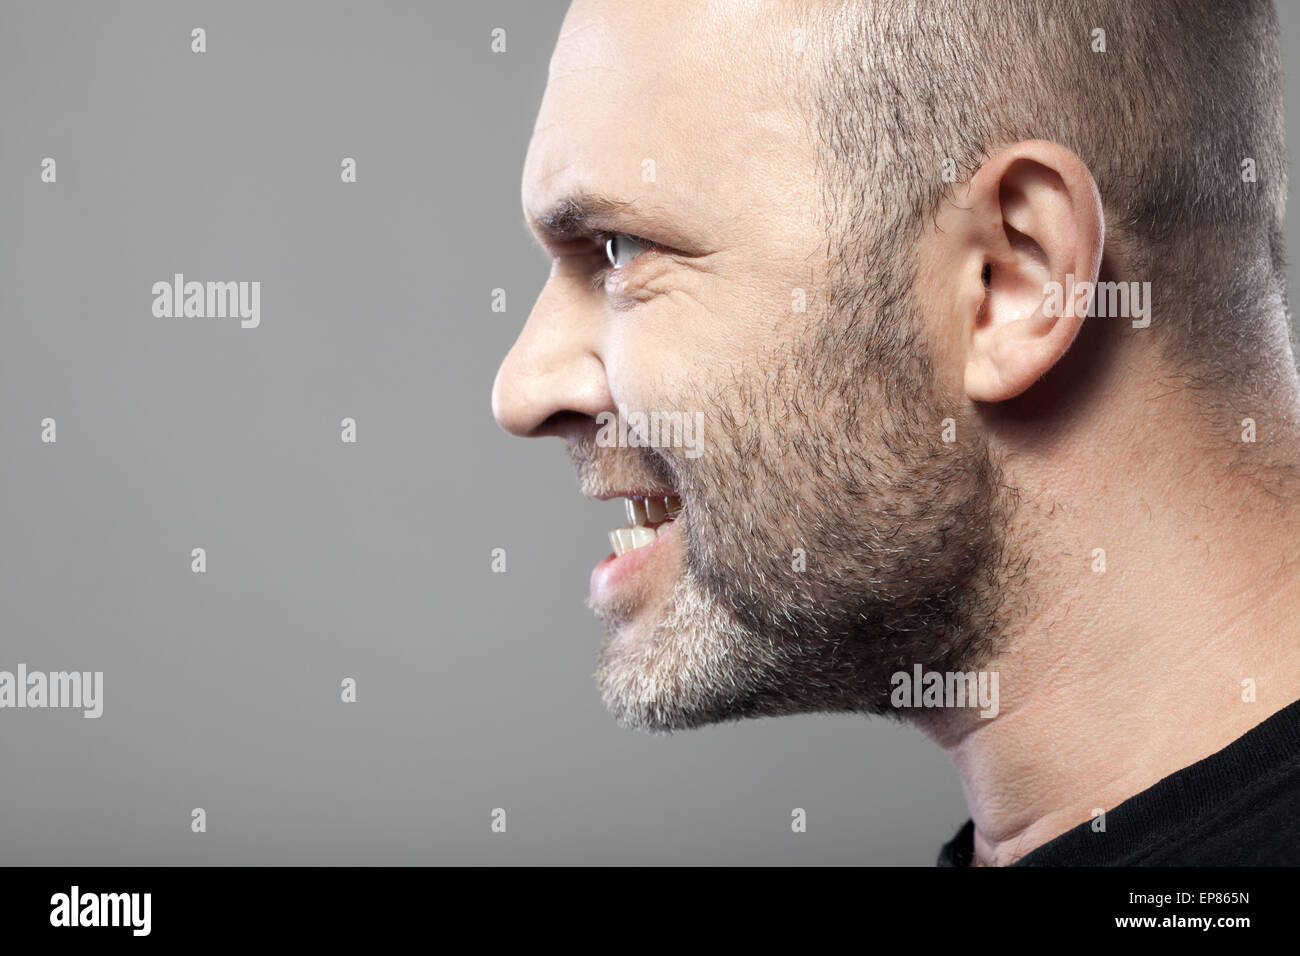 portrait of angry man isolated on gray background Stock Photo